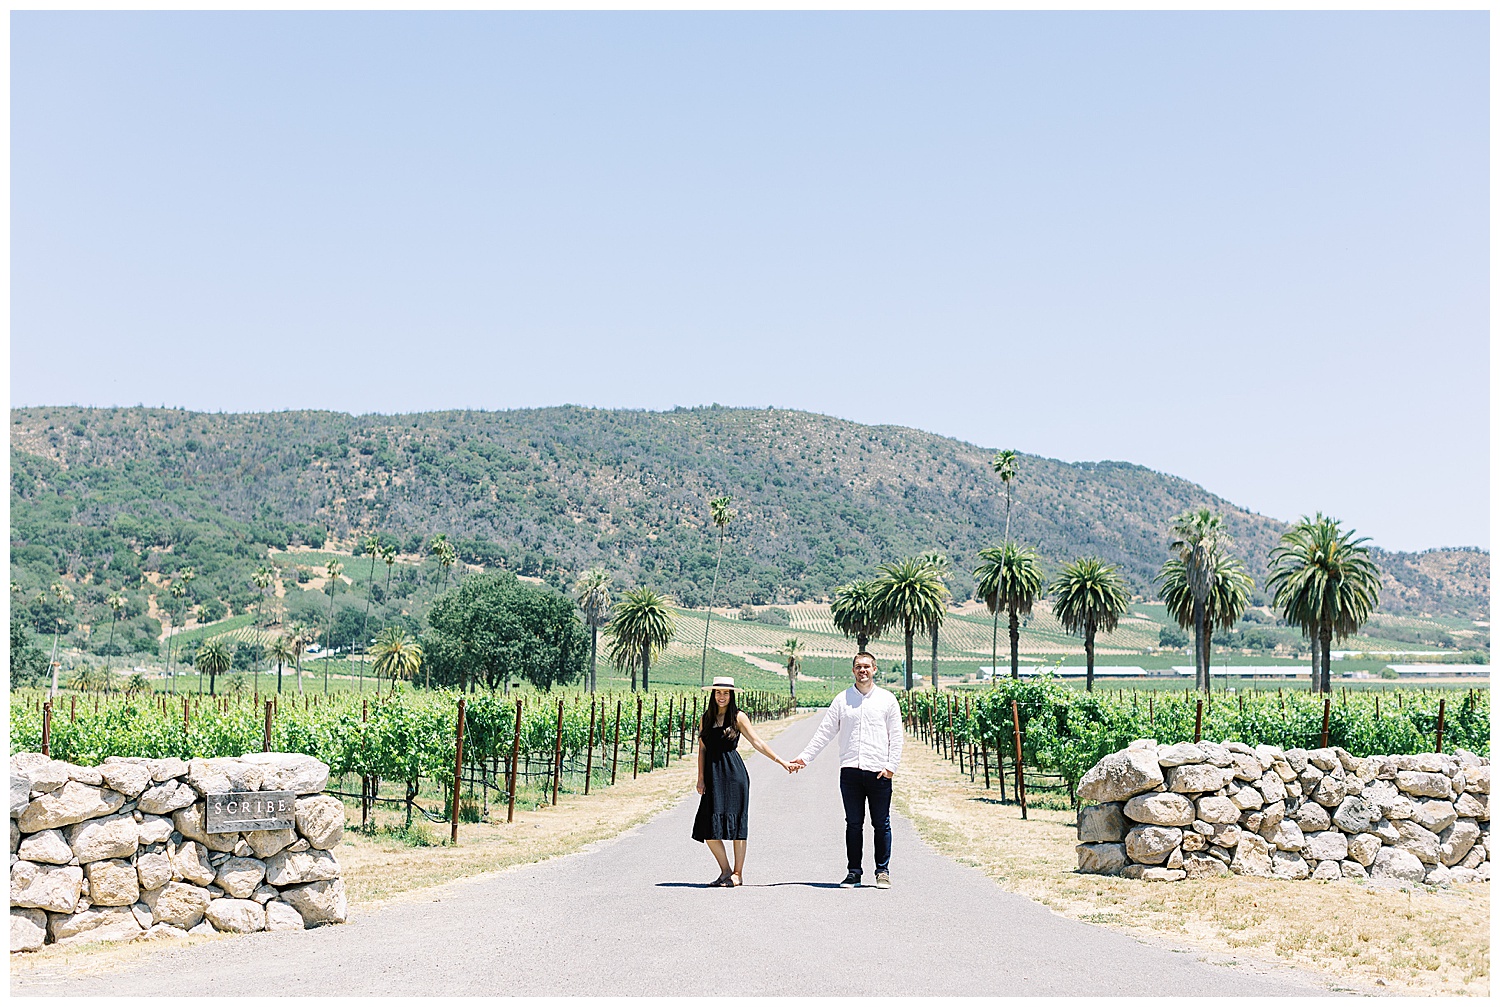 photograph of couple in front of Scribe Winery in Sonoma surrounded by vineyards, stone walls and palm trees by film photographer AGS Photo Art